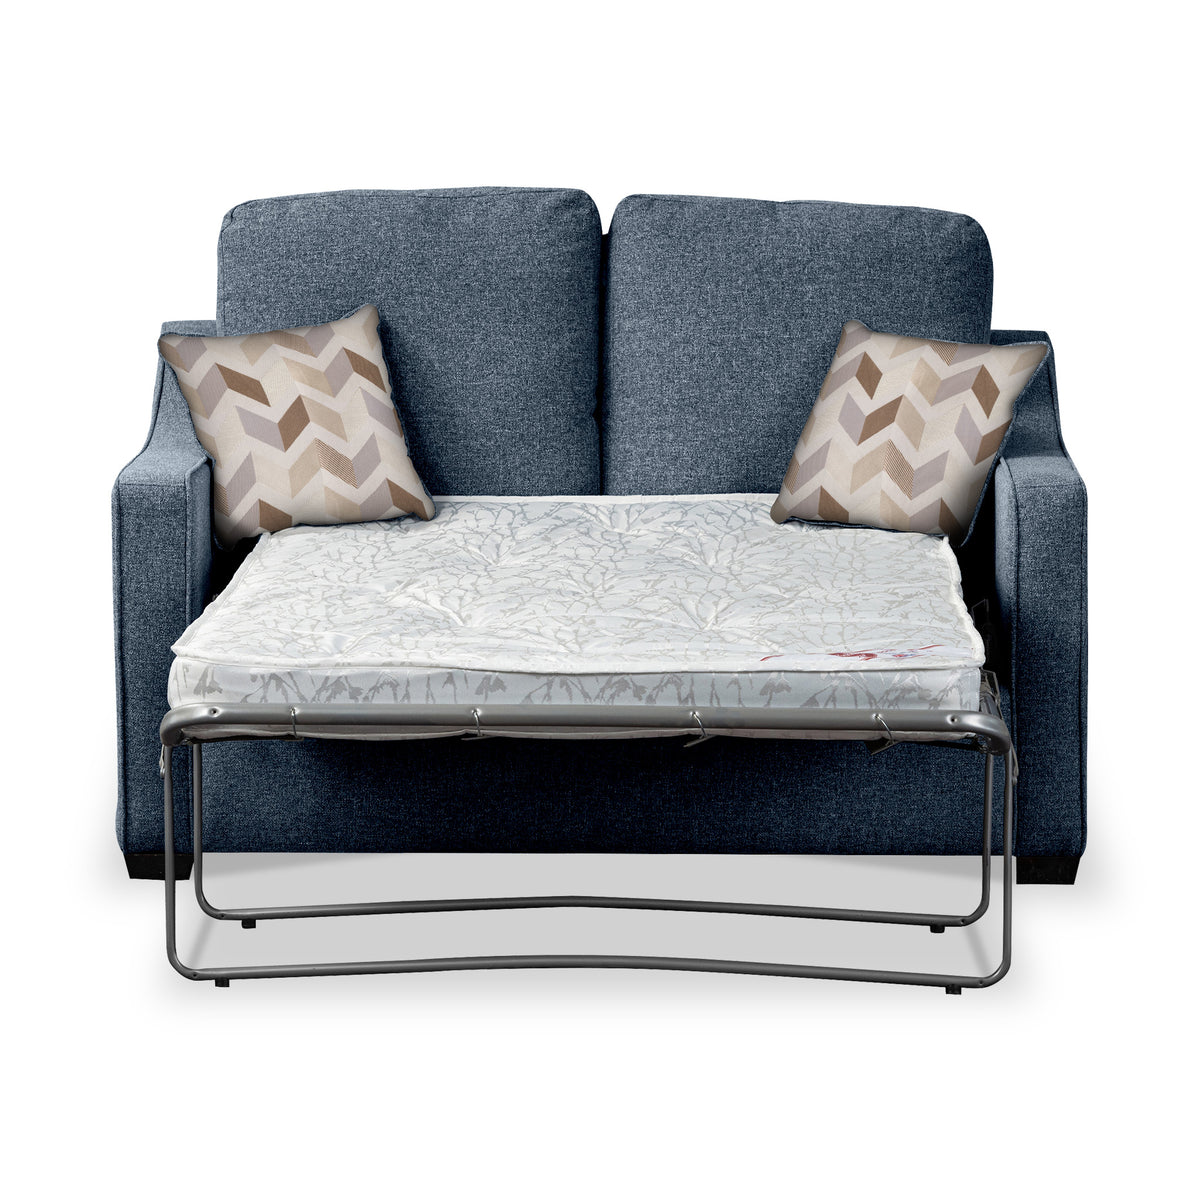 Fenton Midnight Soft Weave 2 Seater Sofabed with Oatmeal Scatter Cushions from Roseland Furniture